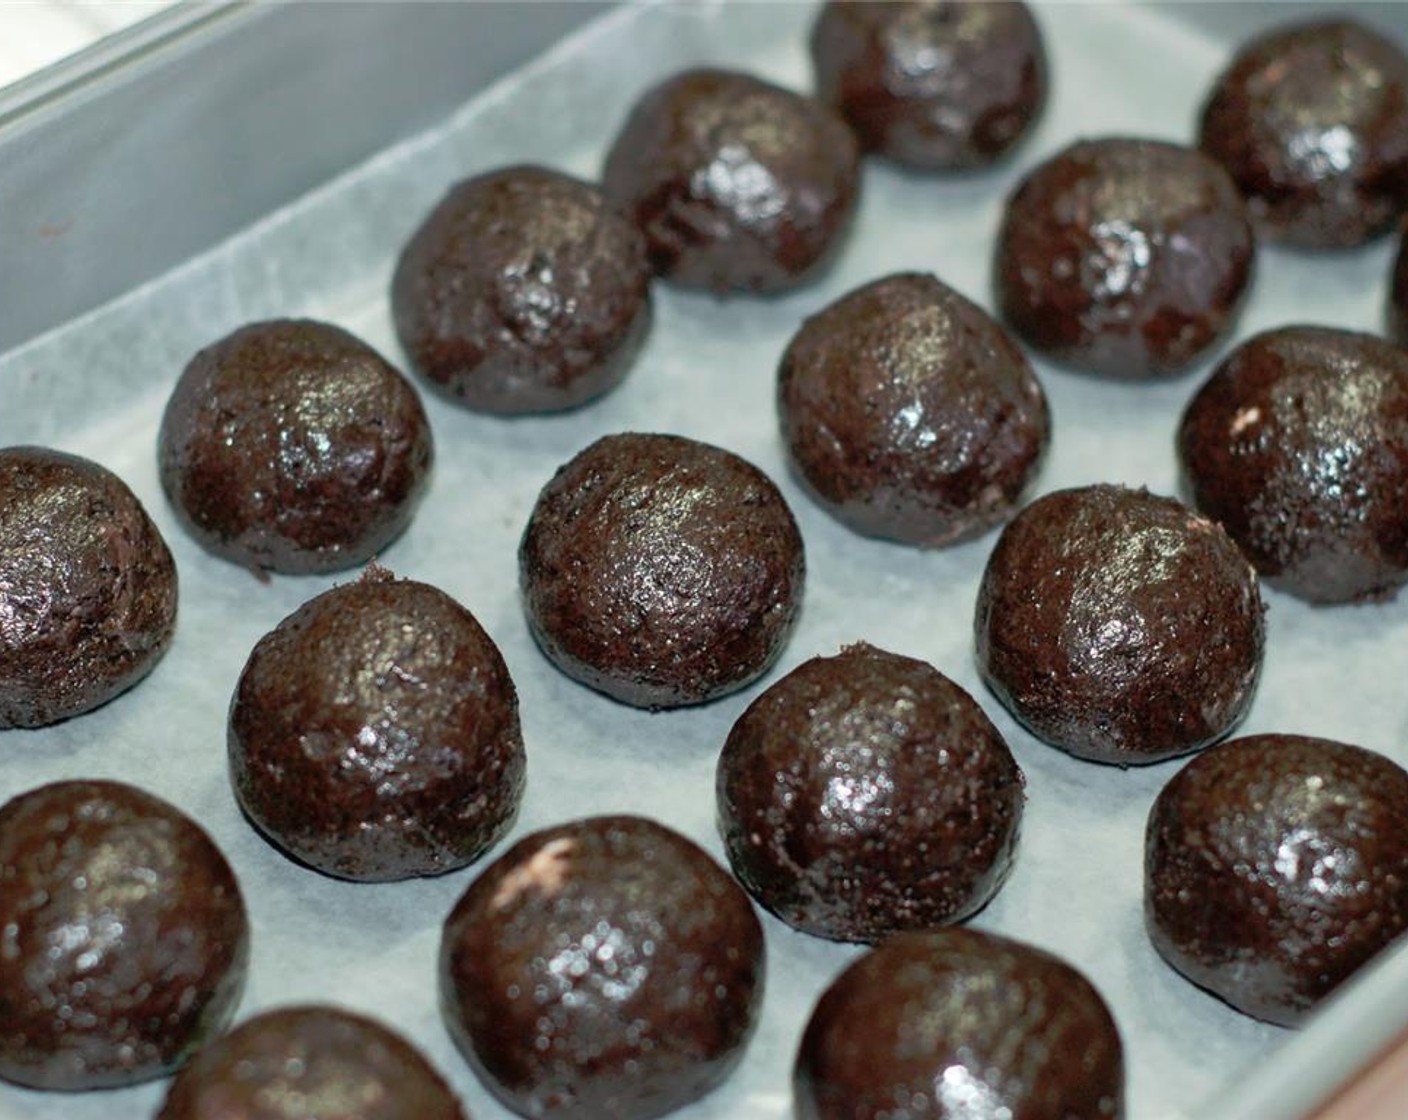 step 3 Roll Oreo mixture into 1 inch balls and place in airtight container lined with wax paper. Place the container in the freezer for at least 1 hour to set.